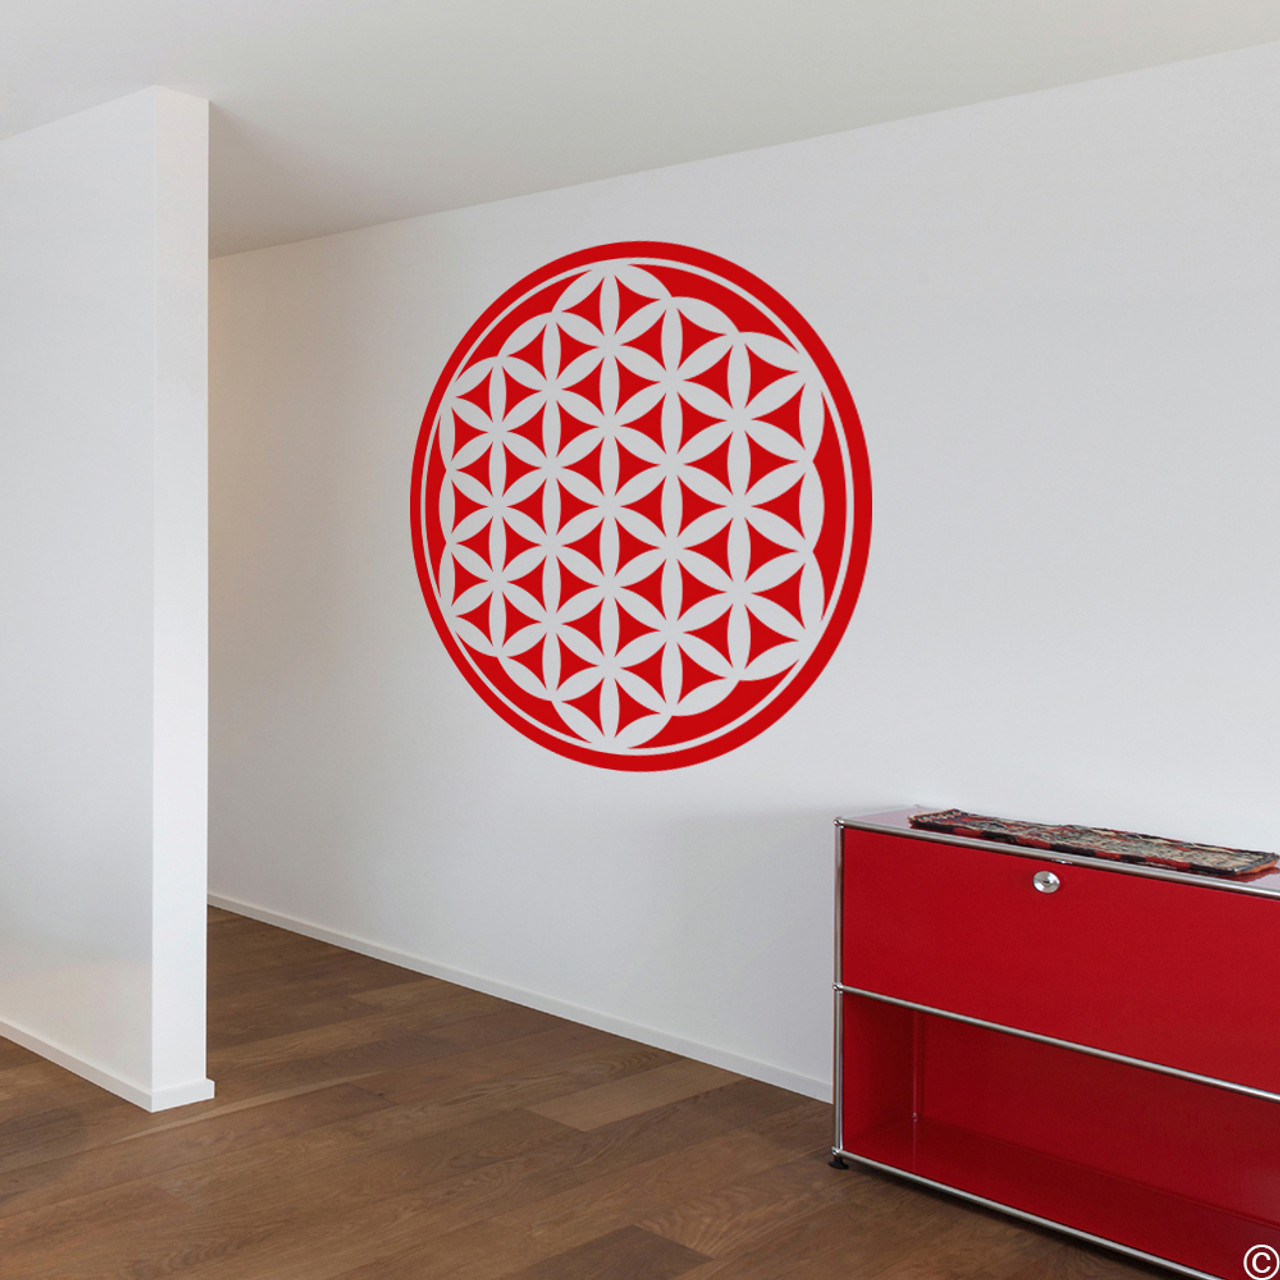 Flower of Life design #3 vinyl wall decal in red